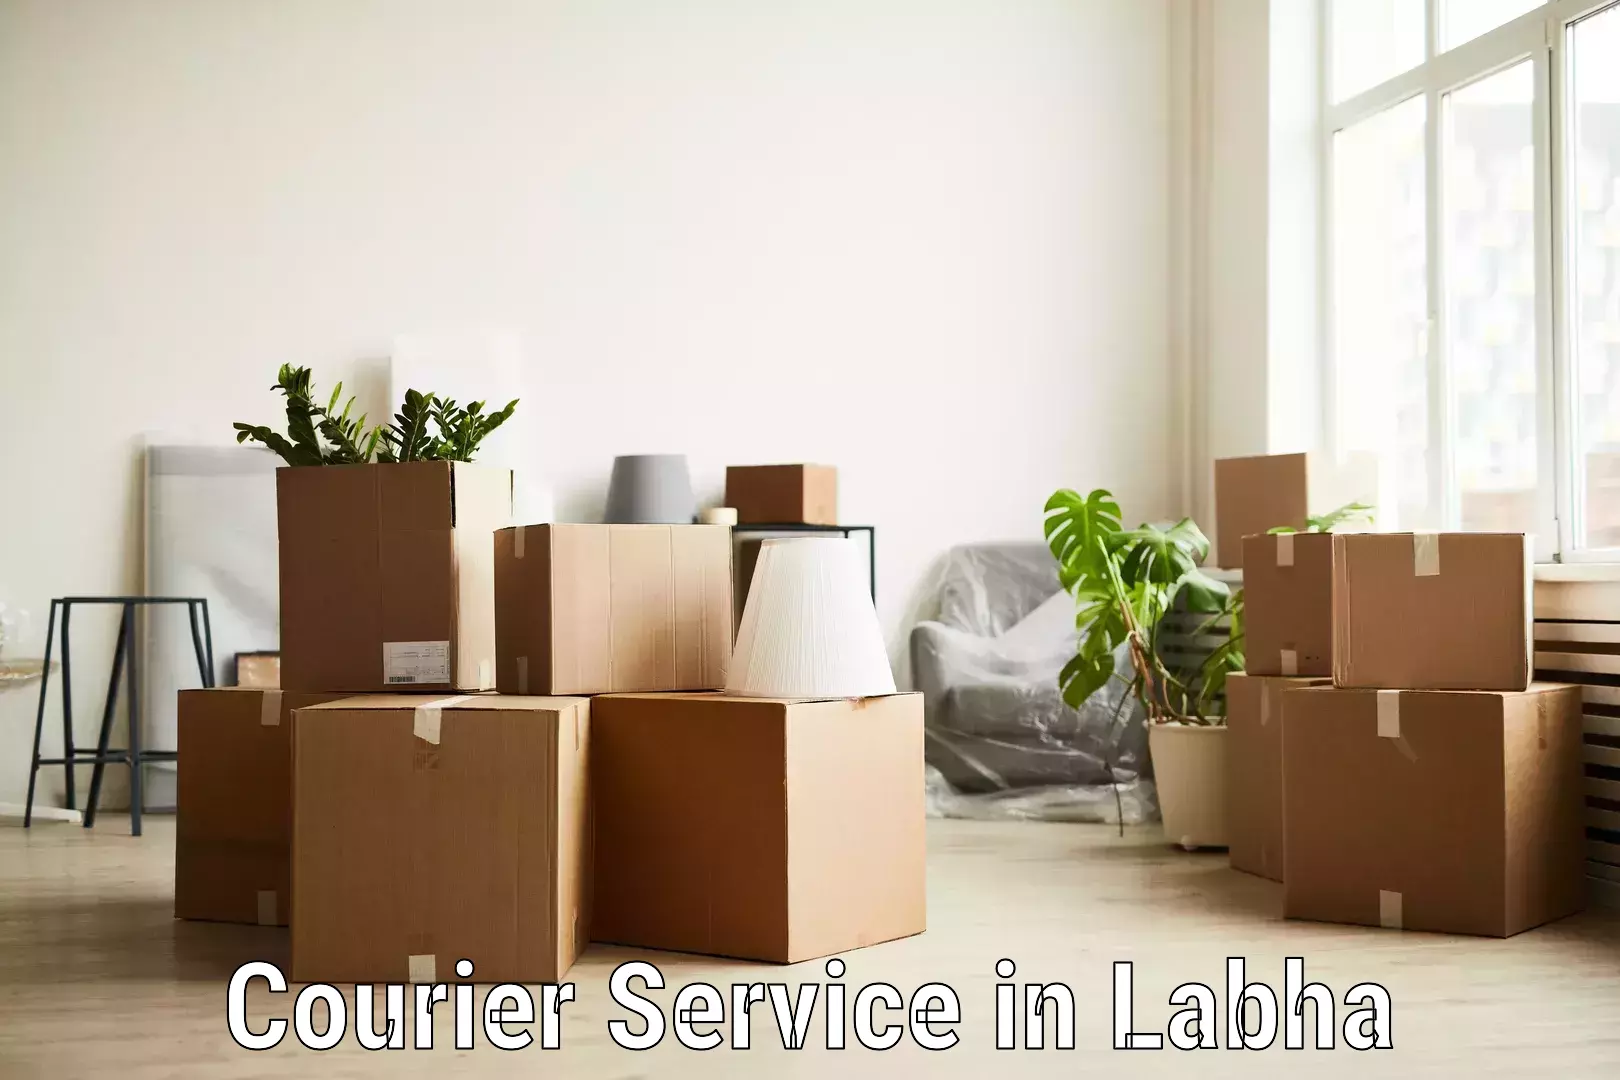 Multi-package shipping in Labha